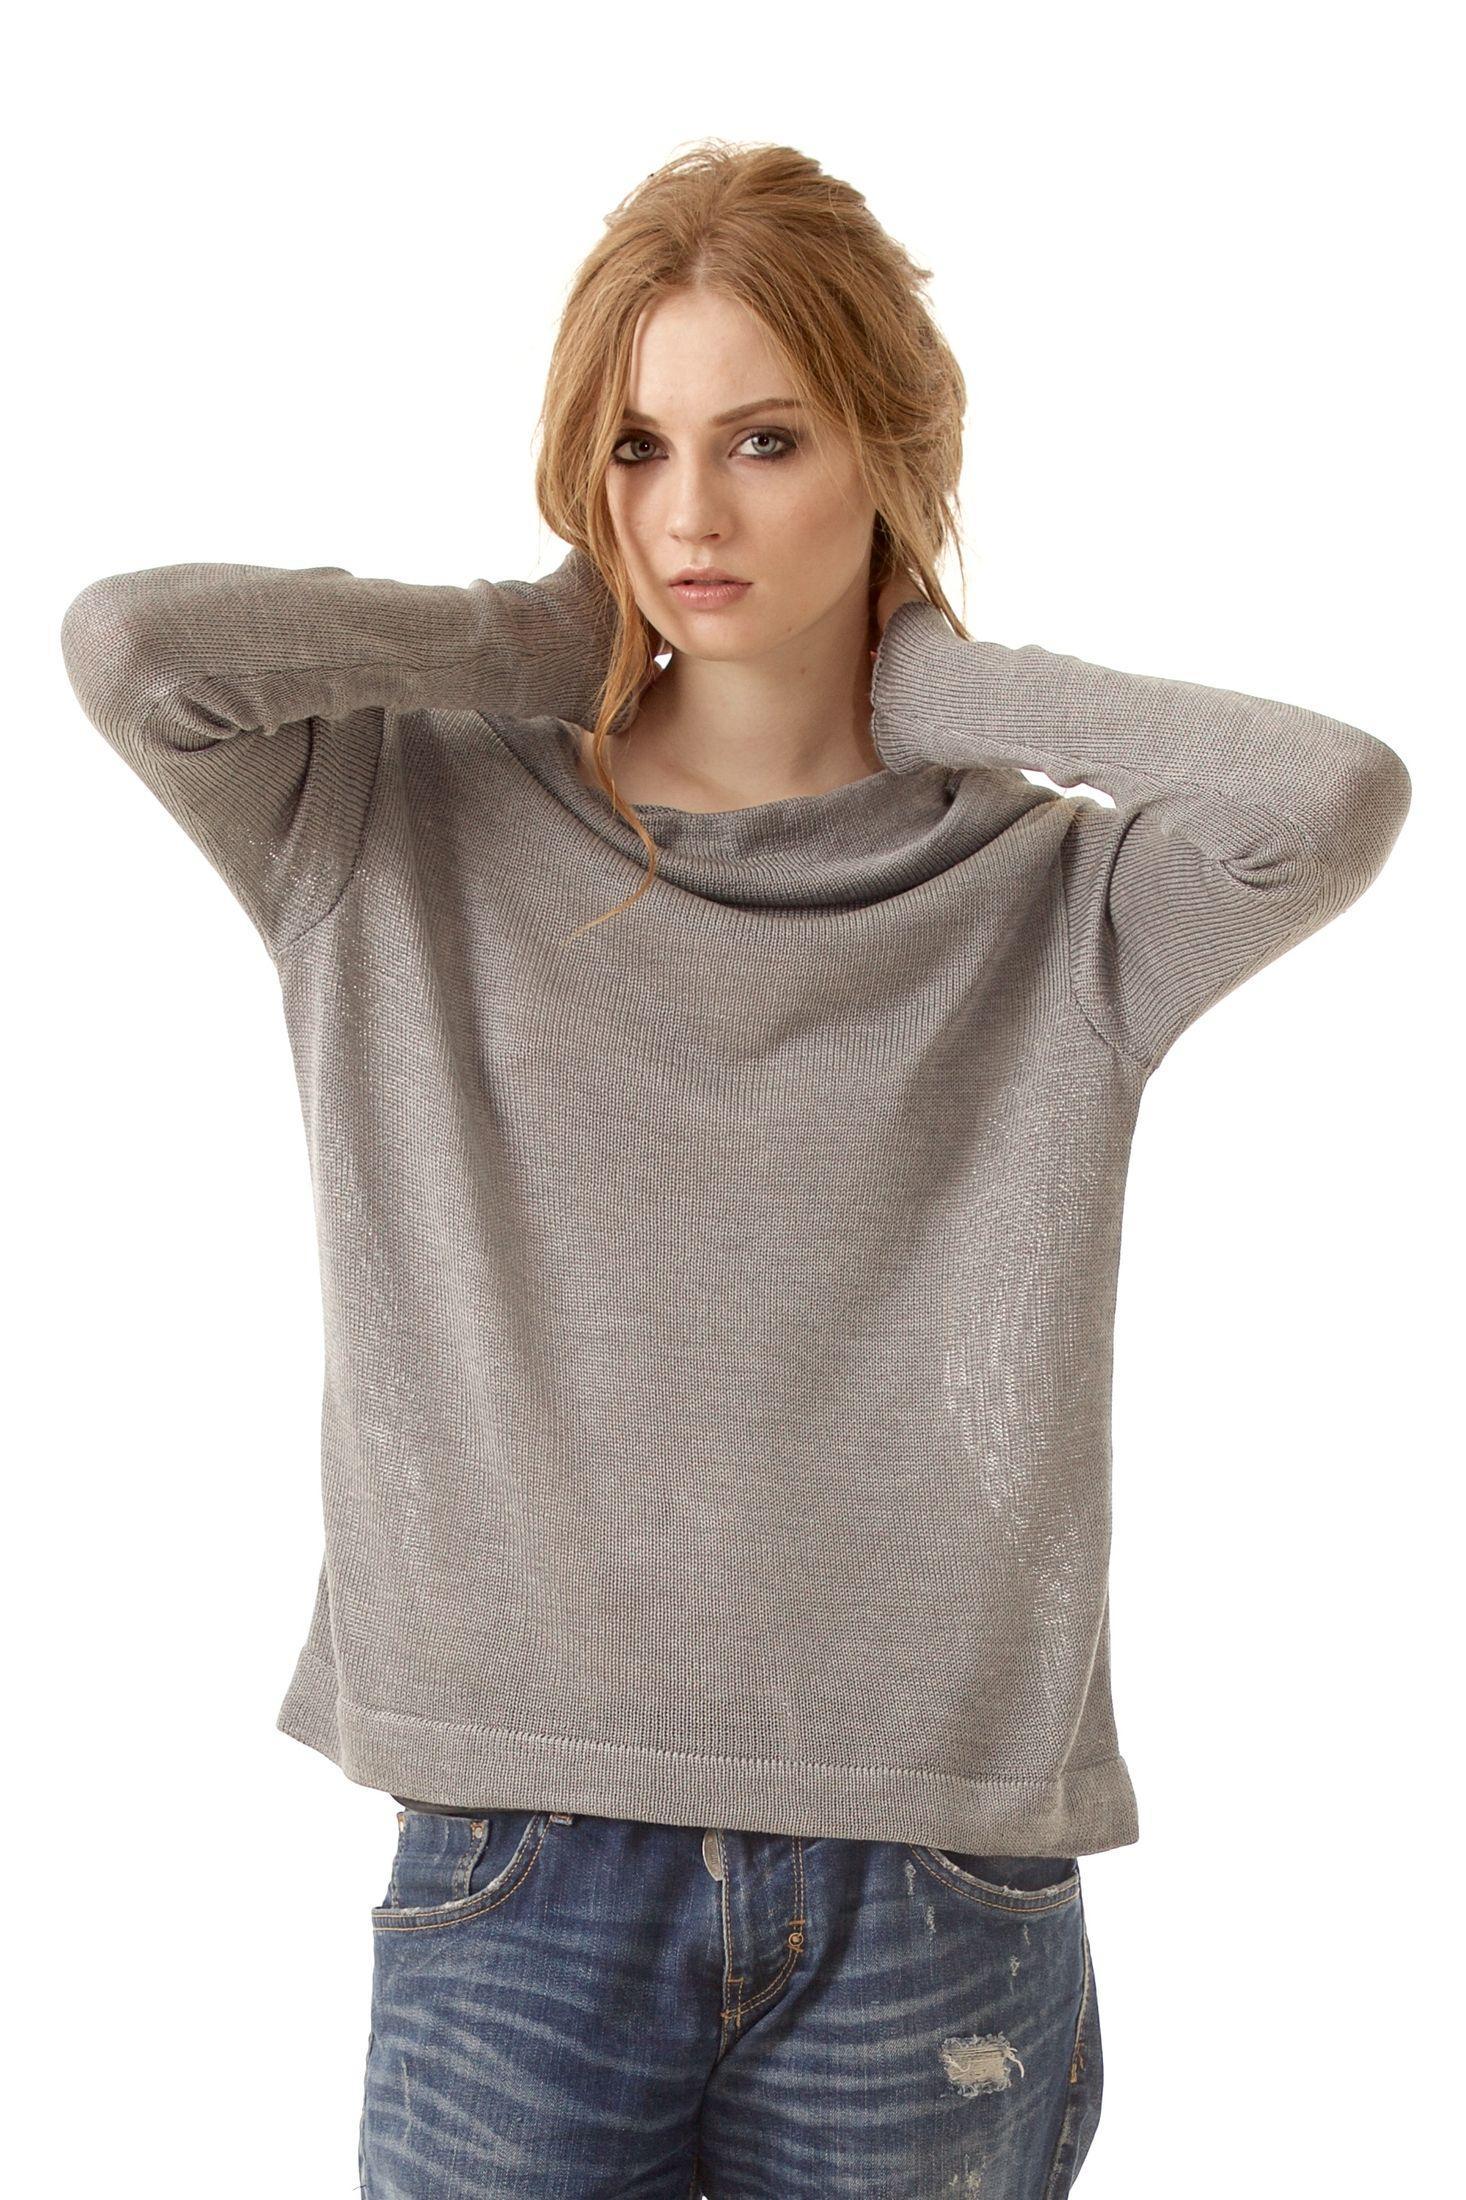 Indulge in AGNES, Krista Elsta's sought-after off-the-shoulder grey sweater, fashioned from exquisite 100% Italian cashmere. With a cowl collar and relaxed fit, it epitomizes effortless chic for any event.